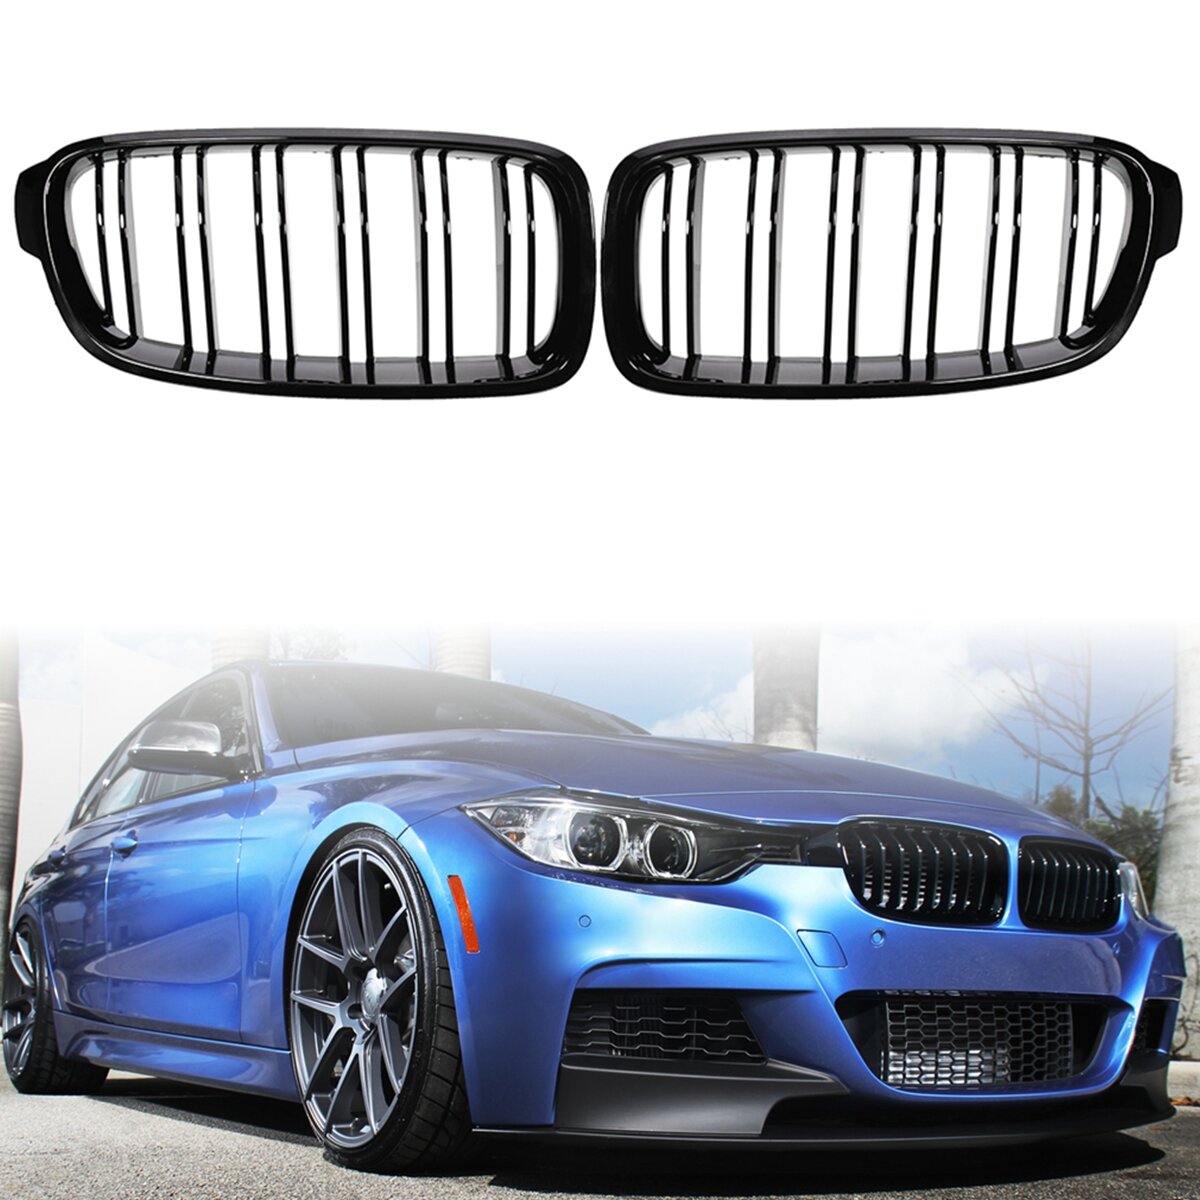 2?STUKS?Gloss?Black?Front?Auto Roosters Automobile Auto Voor BMW F30/F31/F35 2012-2018